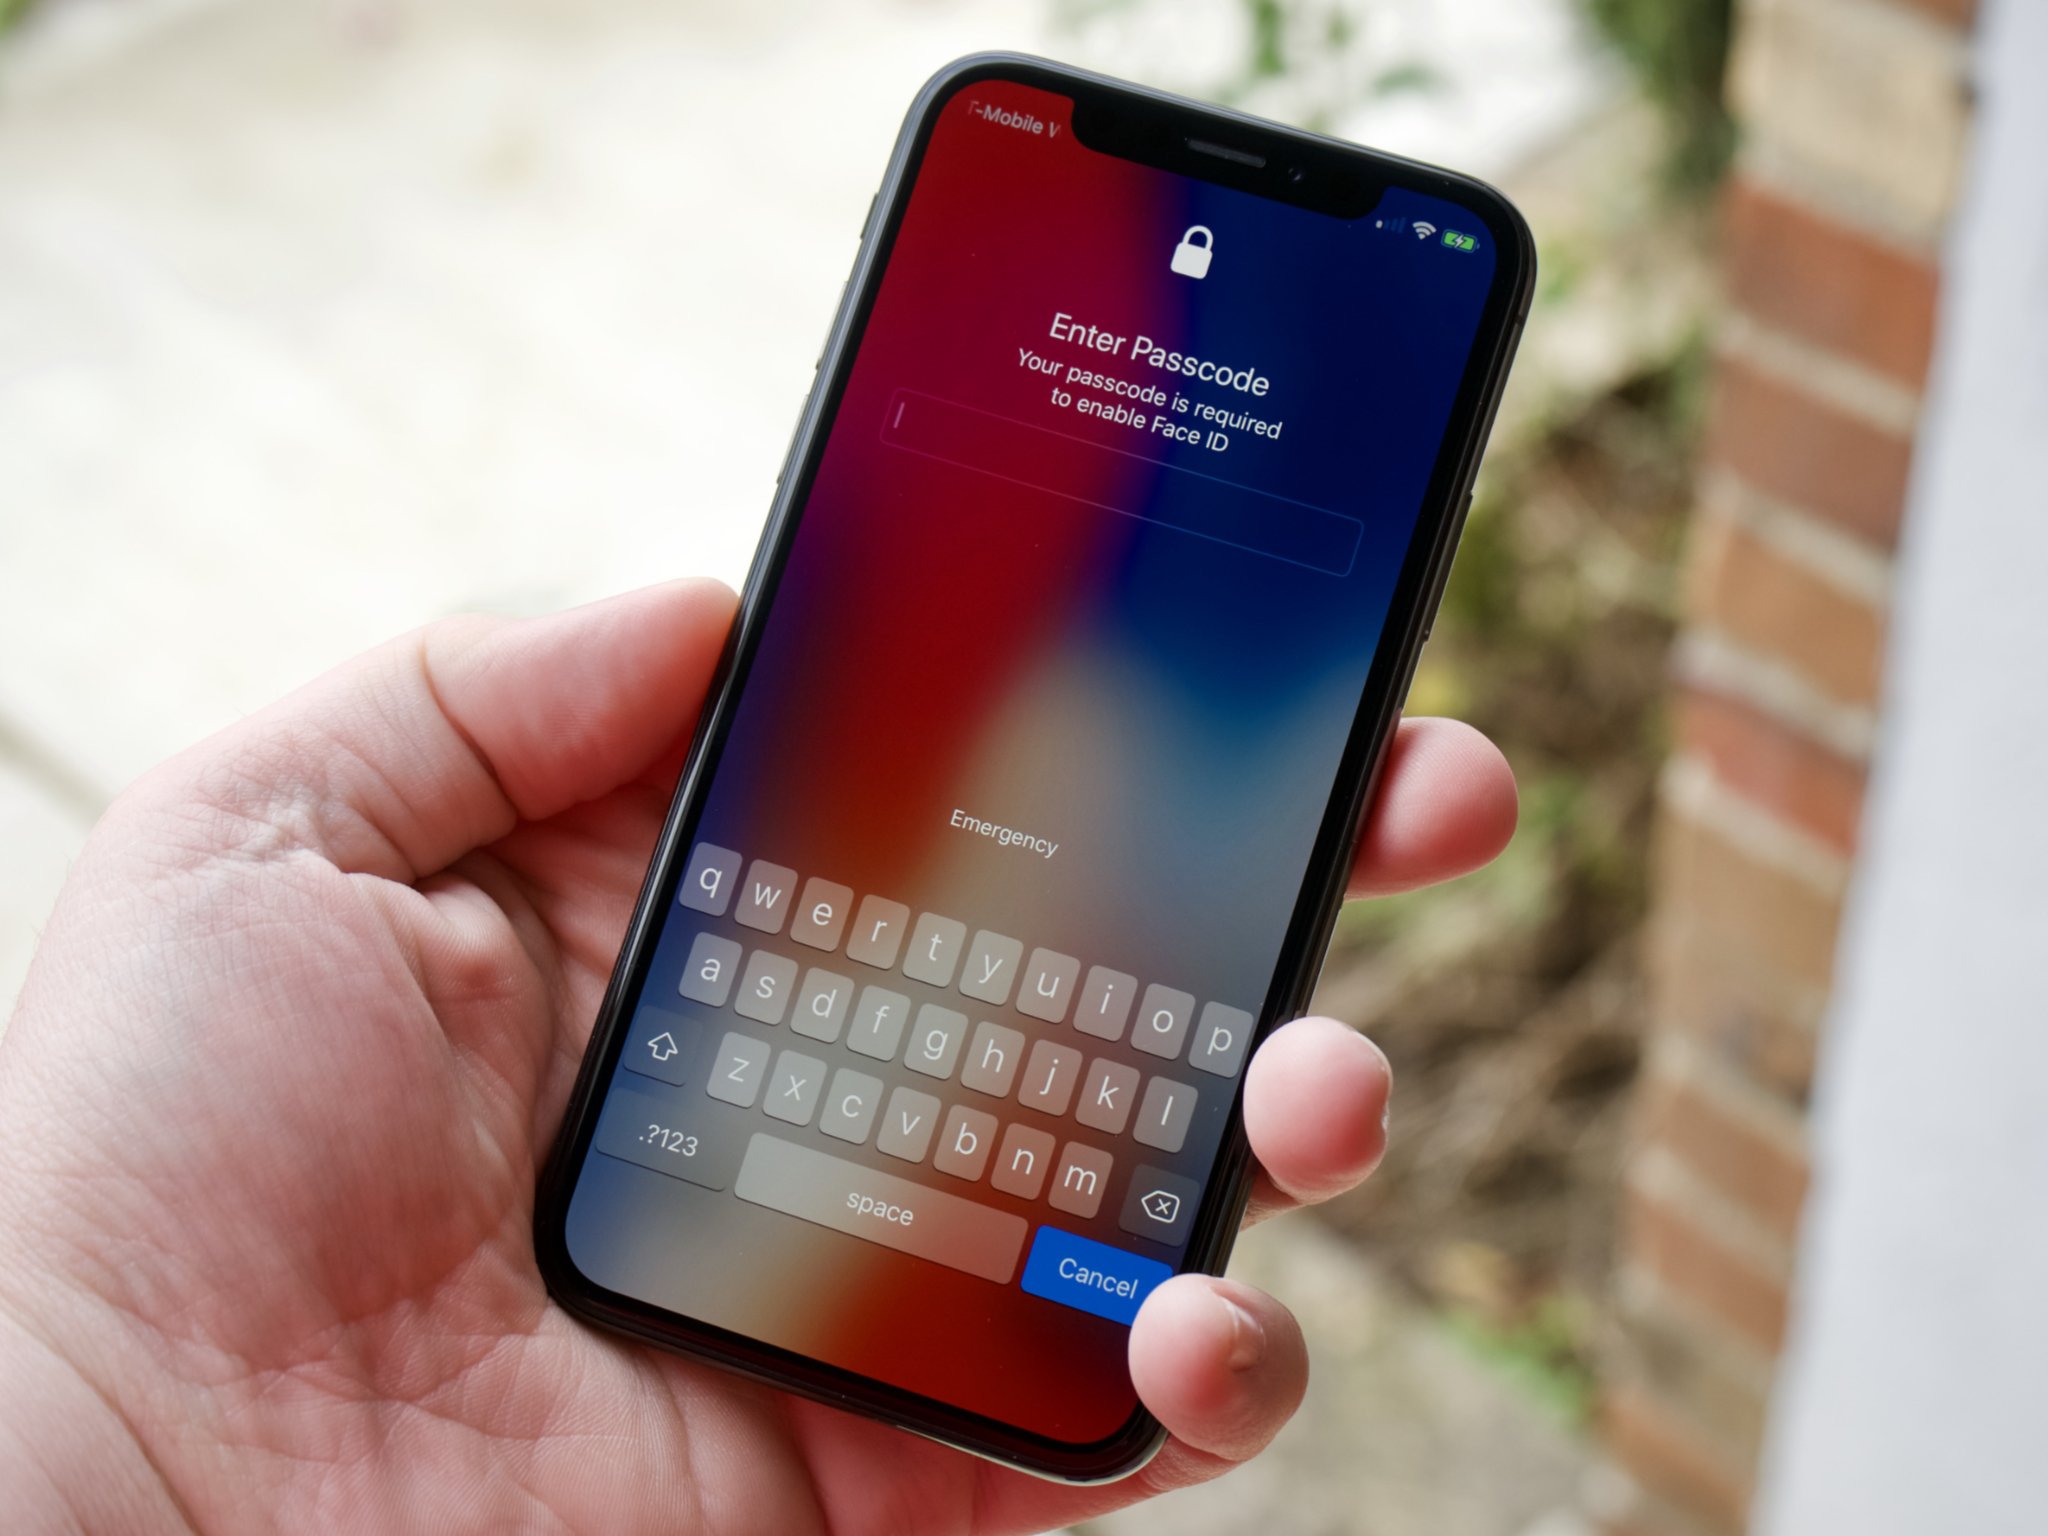 How to quickly disable Face ID